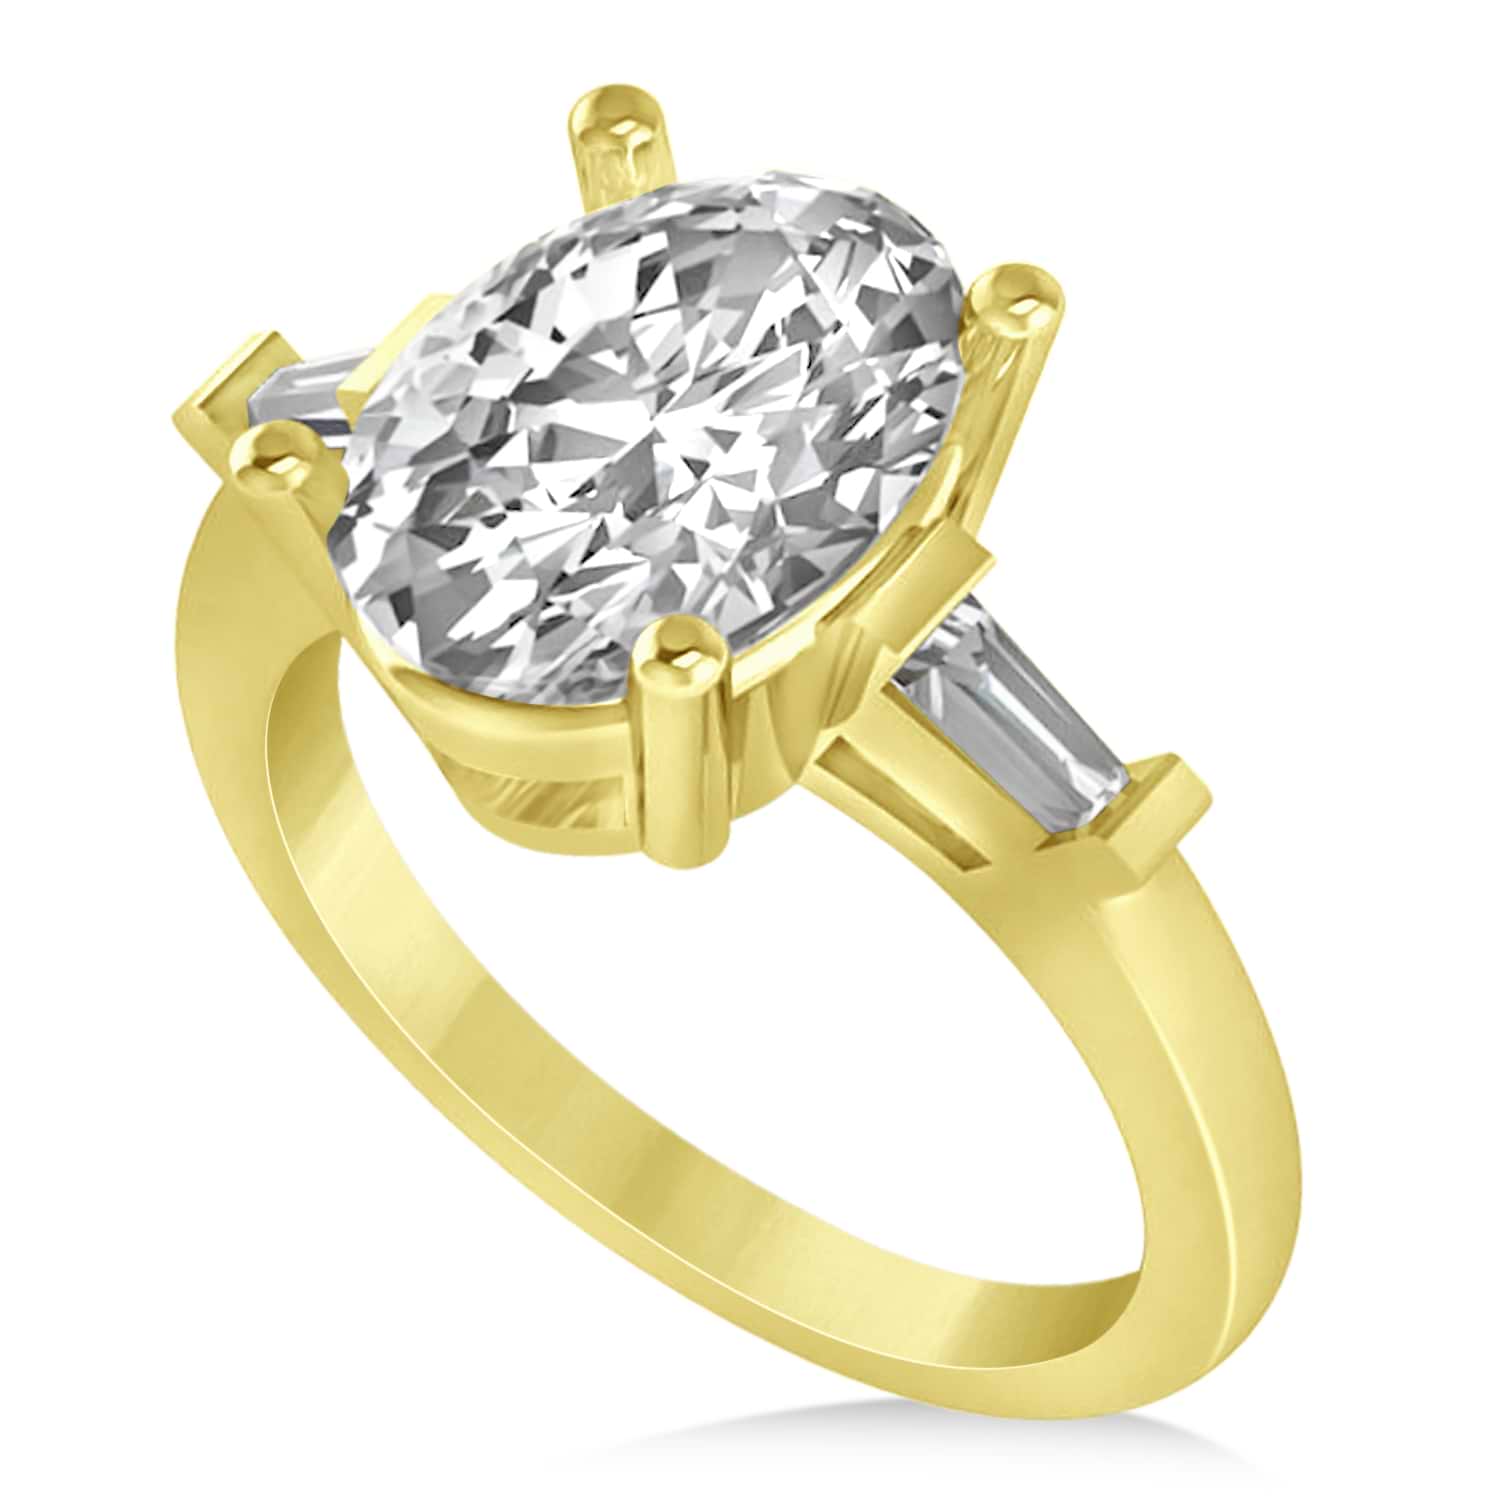 Oval & Baguette Cut Diamond Engagement Ring 14k Yellow Gold (3.30ct)